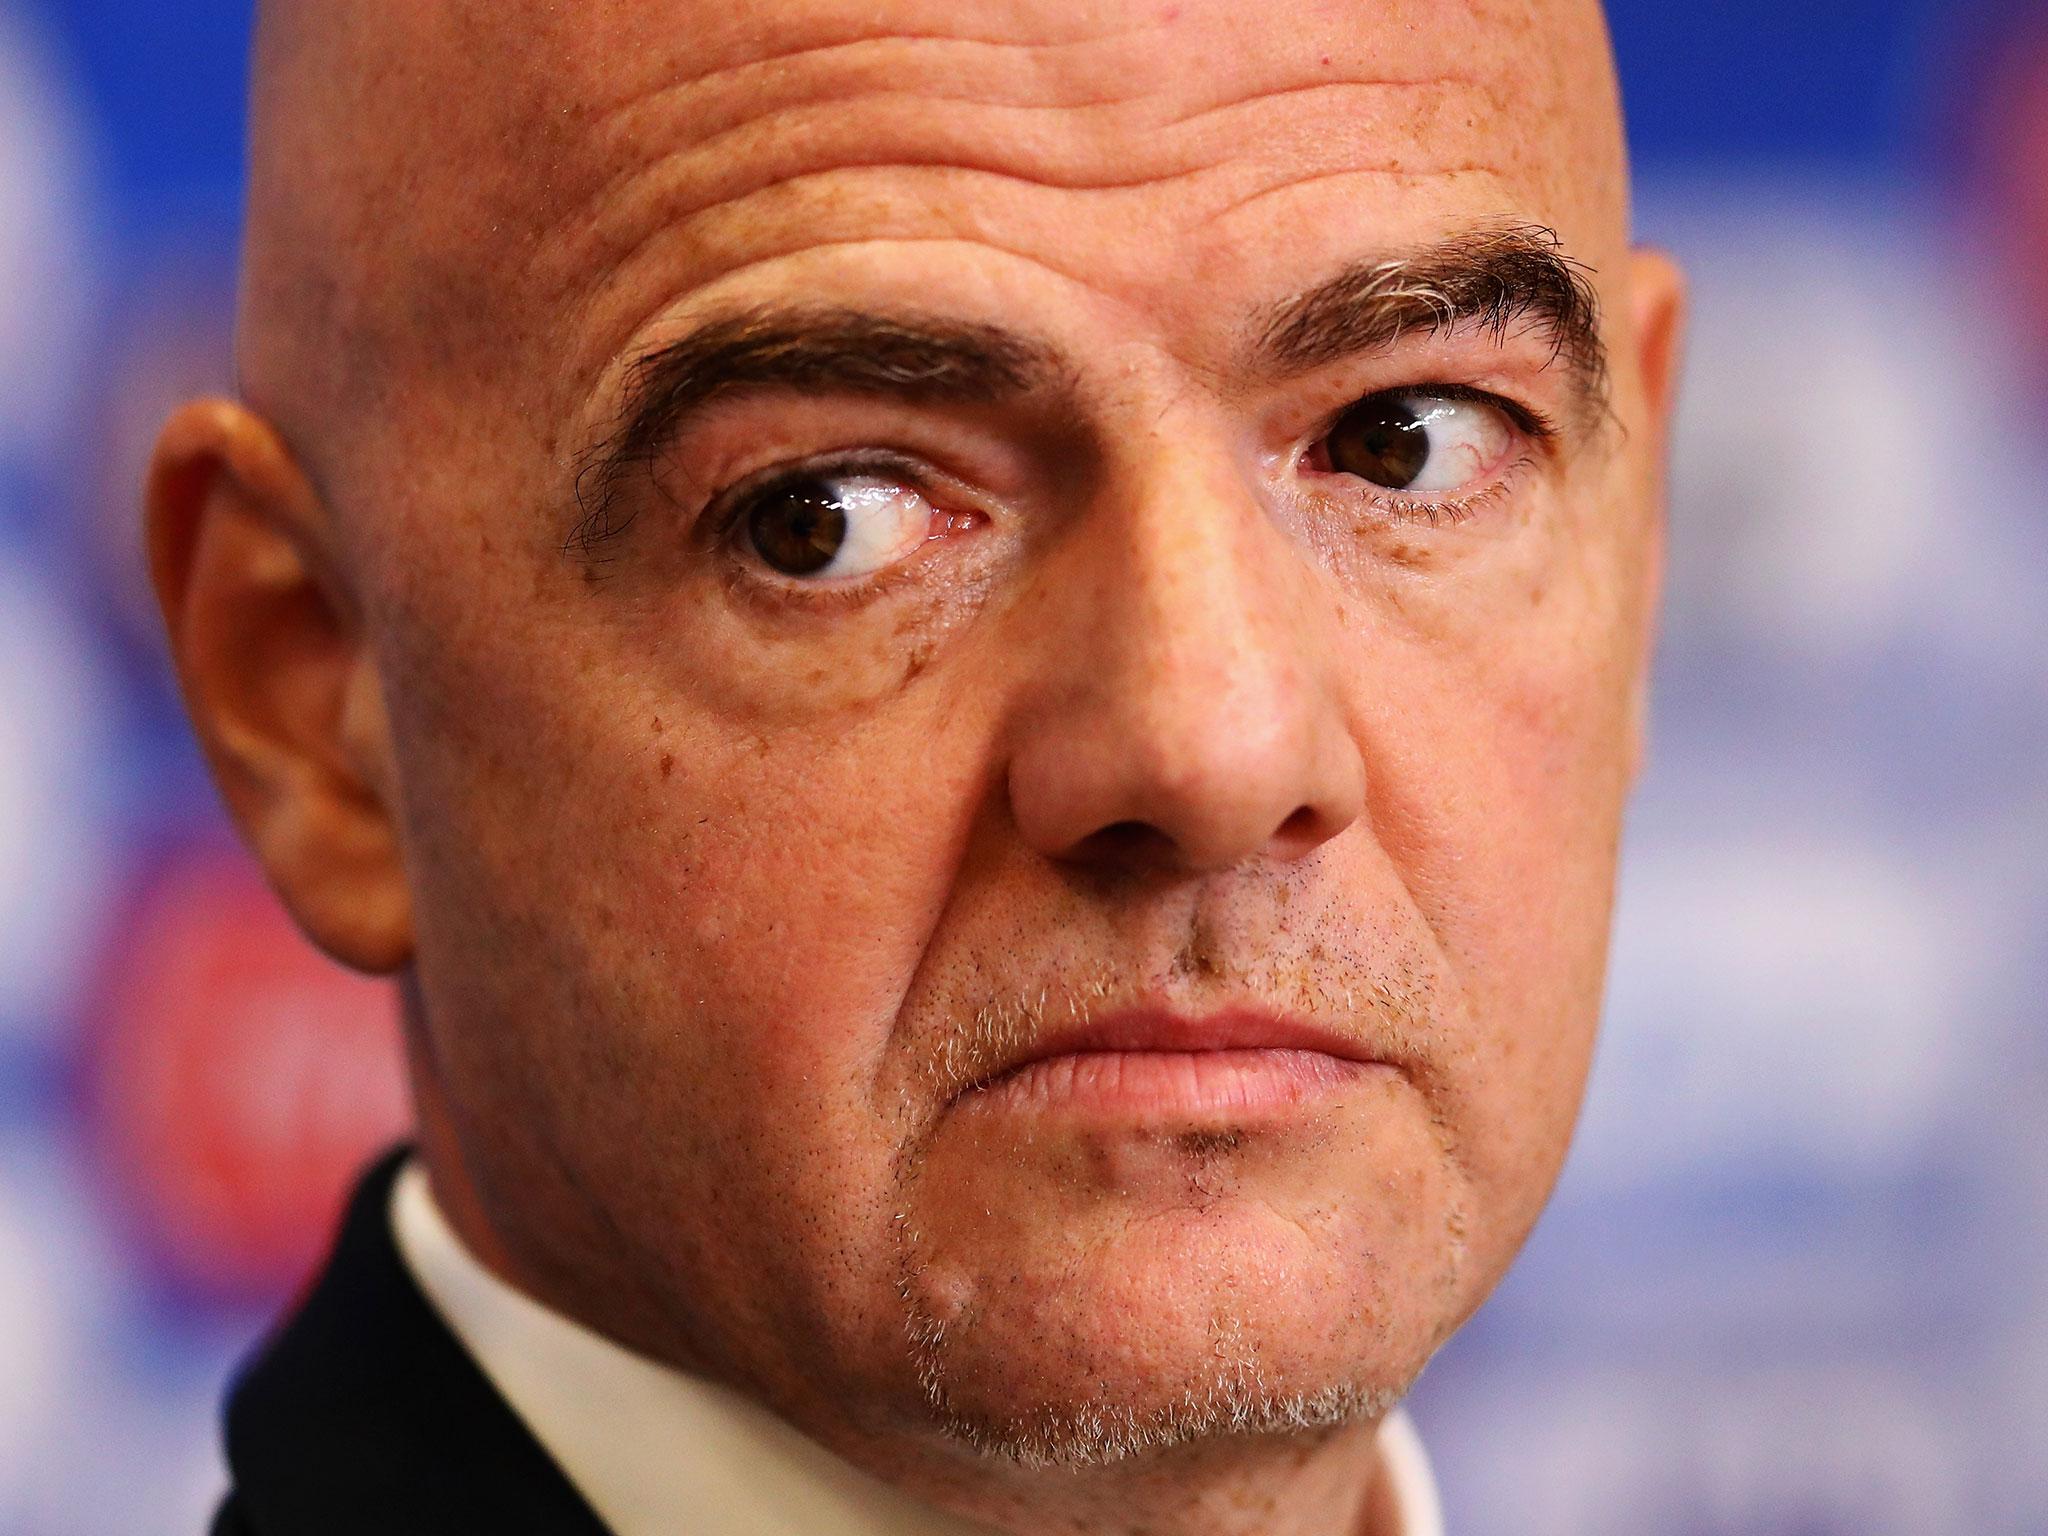 &#13;
Infantino is a big supporter of VAR &#13;